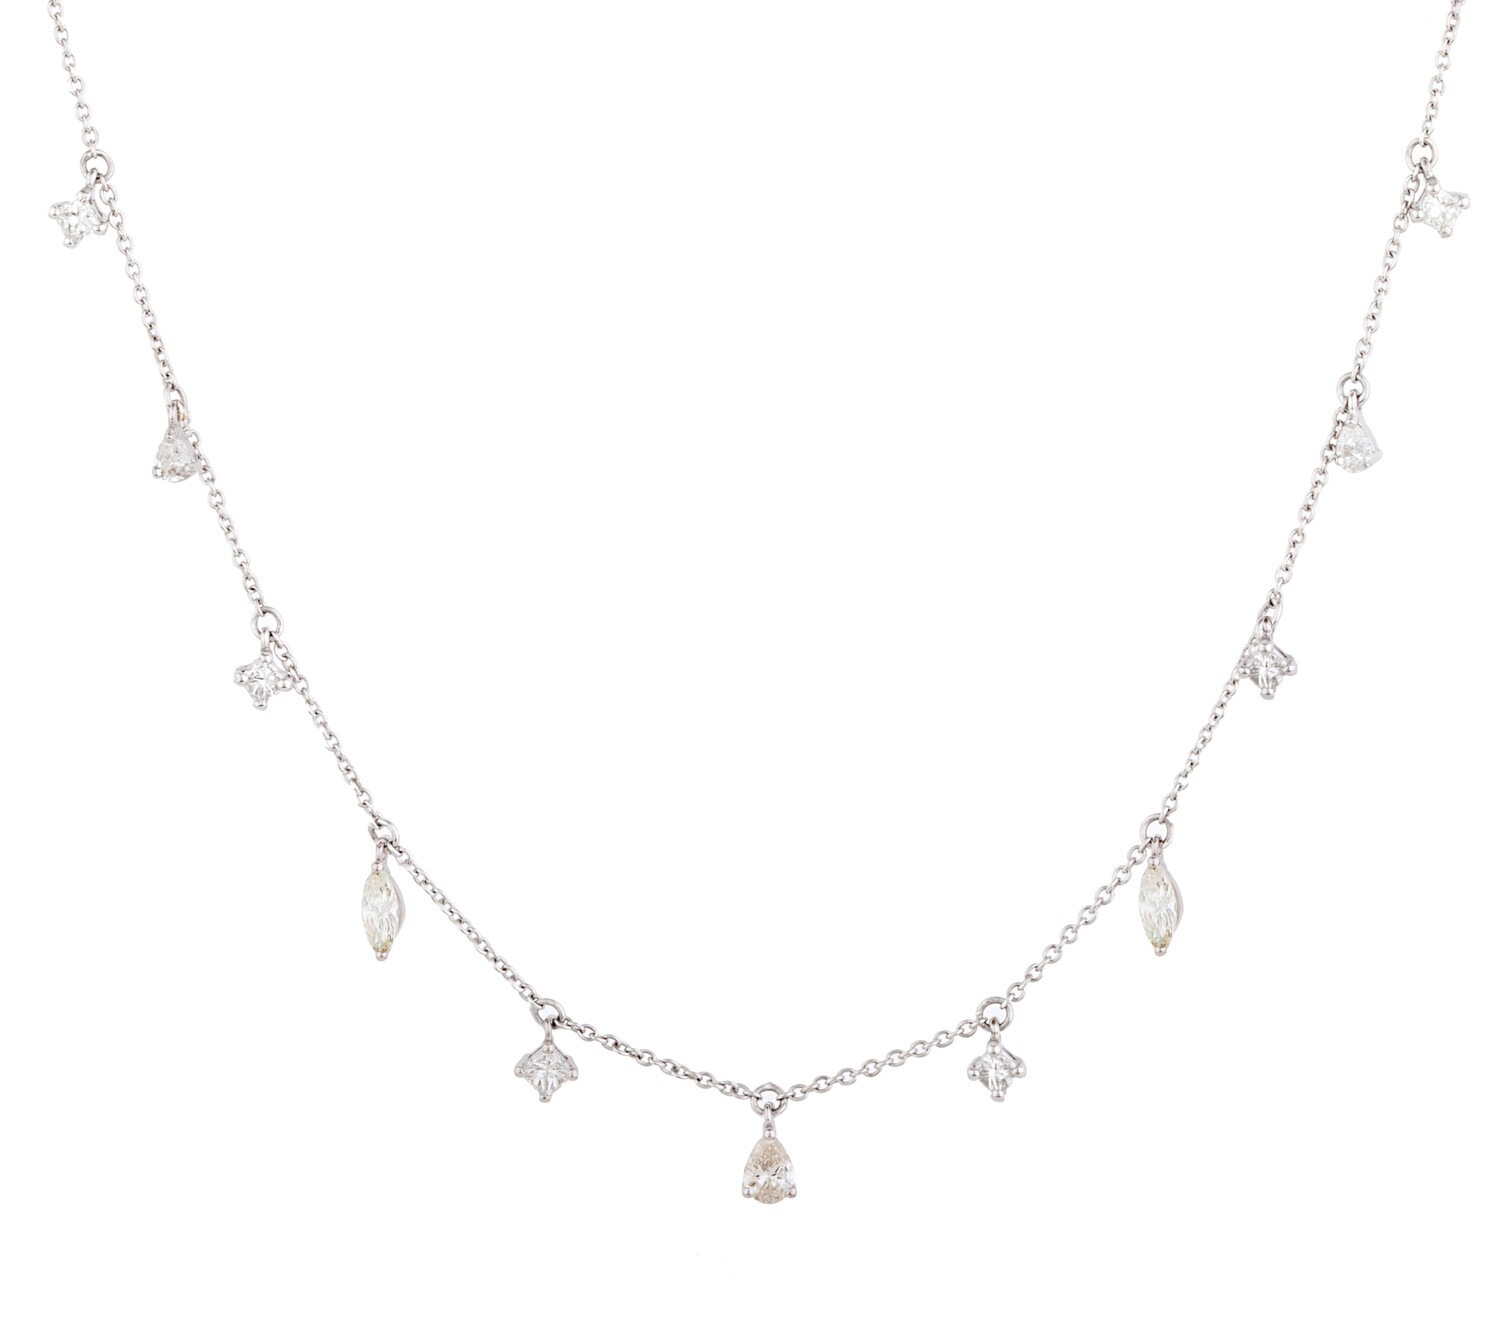 Eternal Diamond Necklace with Marquise, Pear and princess